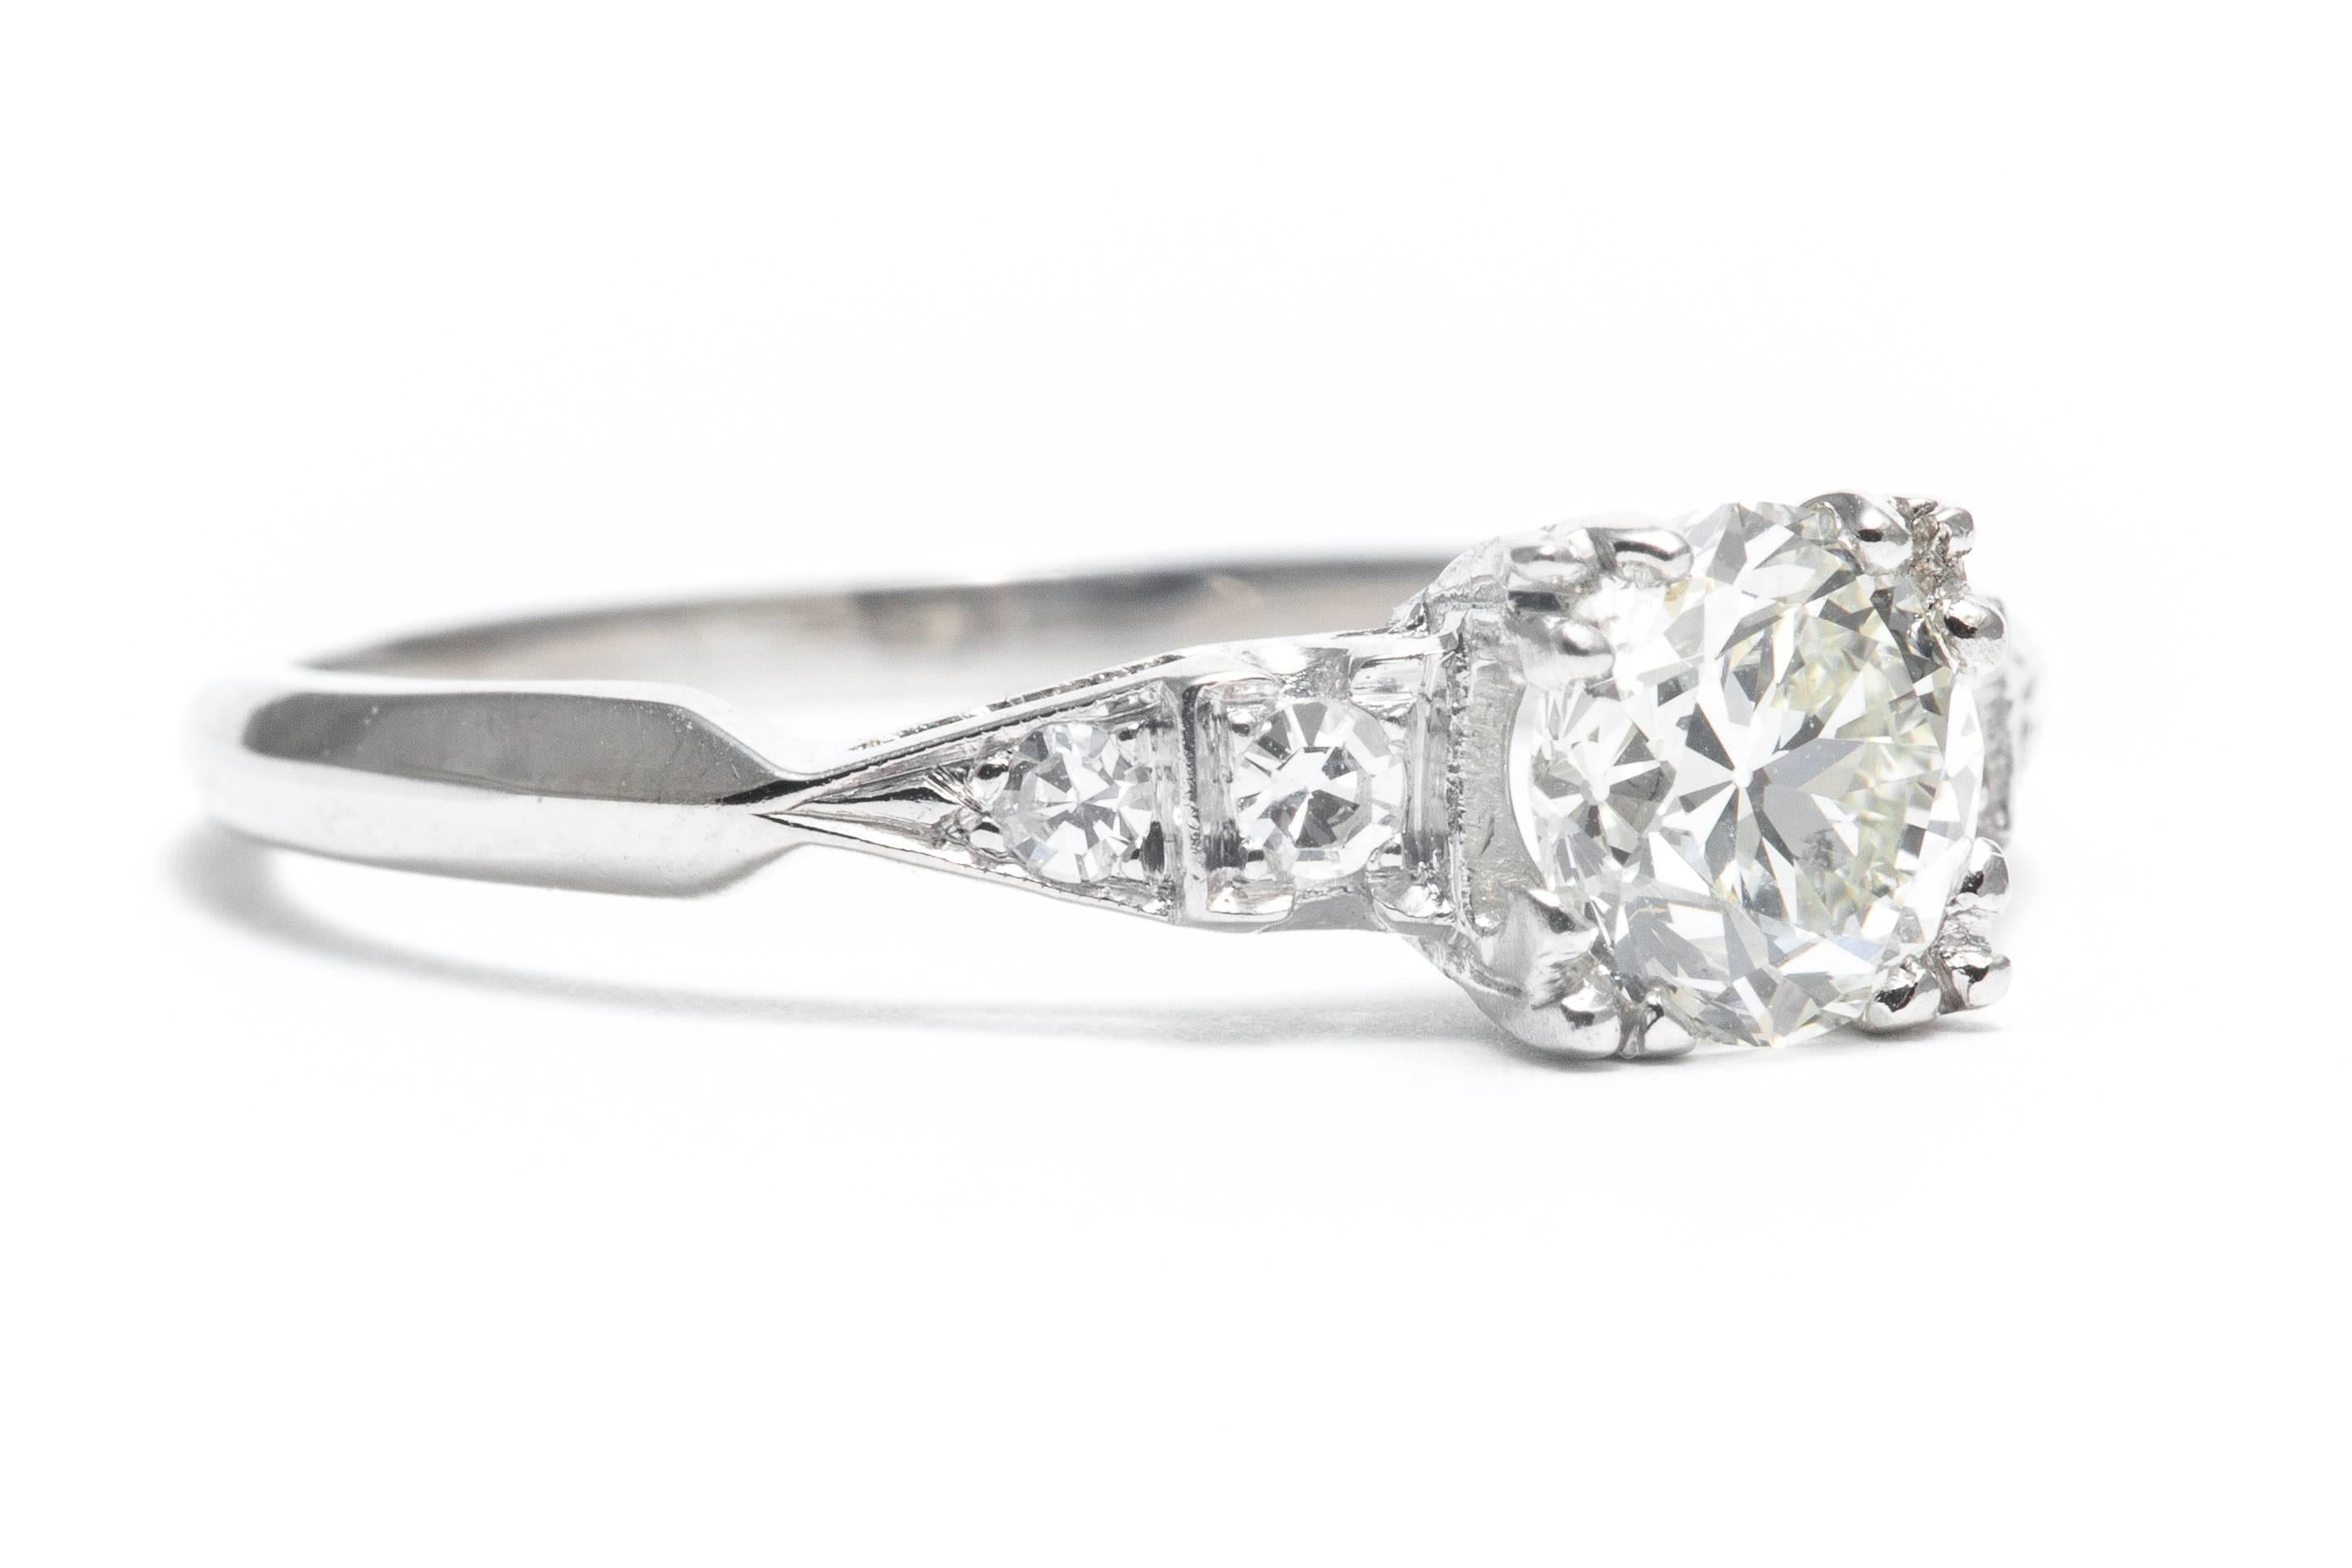 An original art deco period diamond engagement ring set in luxurious platinum.  Centered by a high quality antique European cut diamond, this ring features a traditional geometric art deco design accented by Swiss cut diamonds.

Grading as VS1